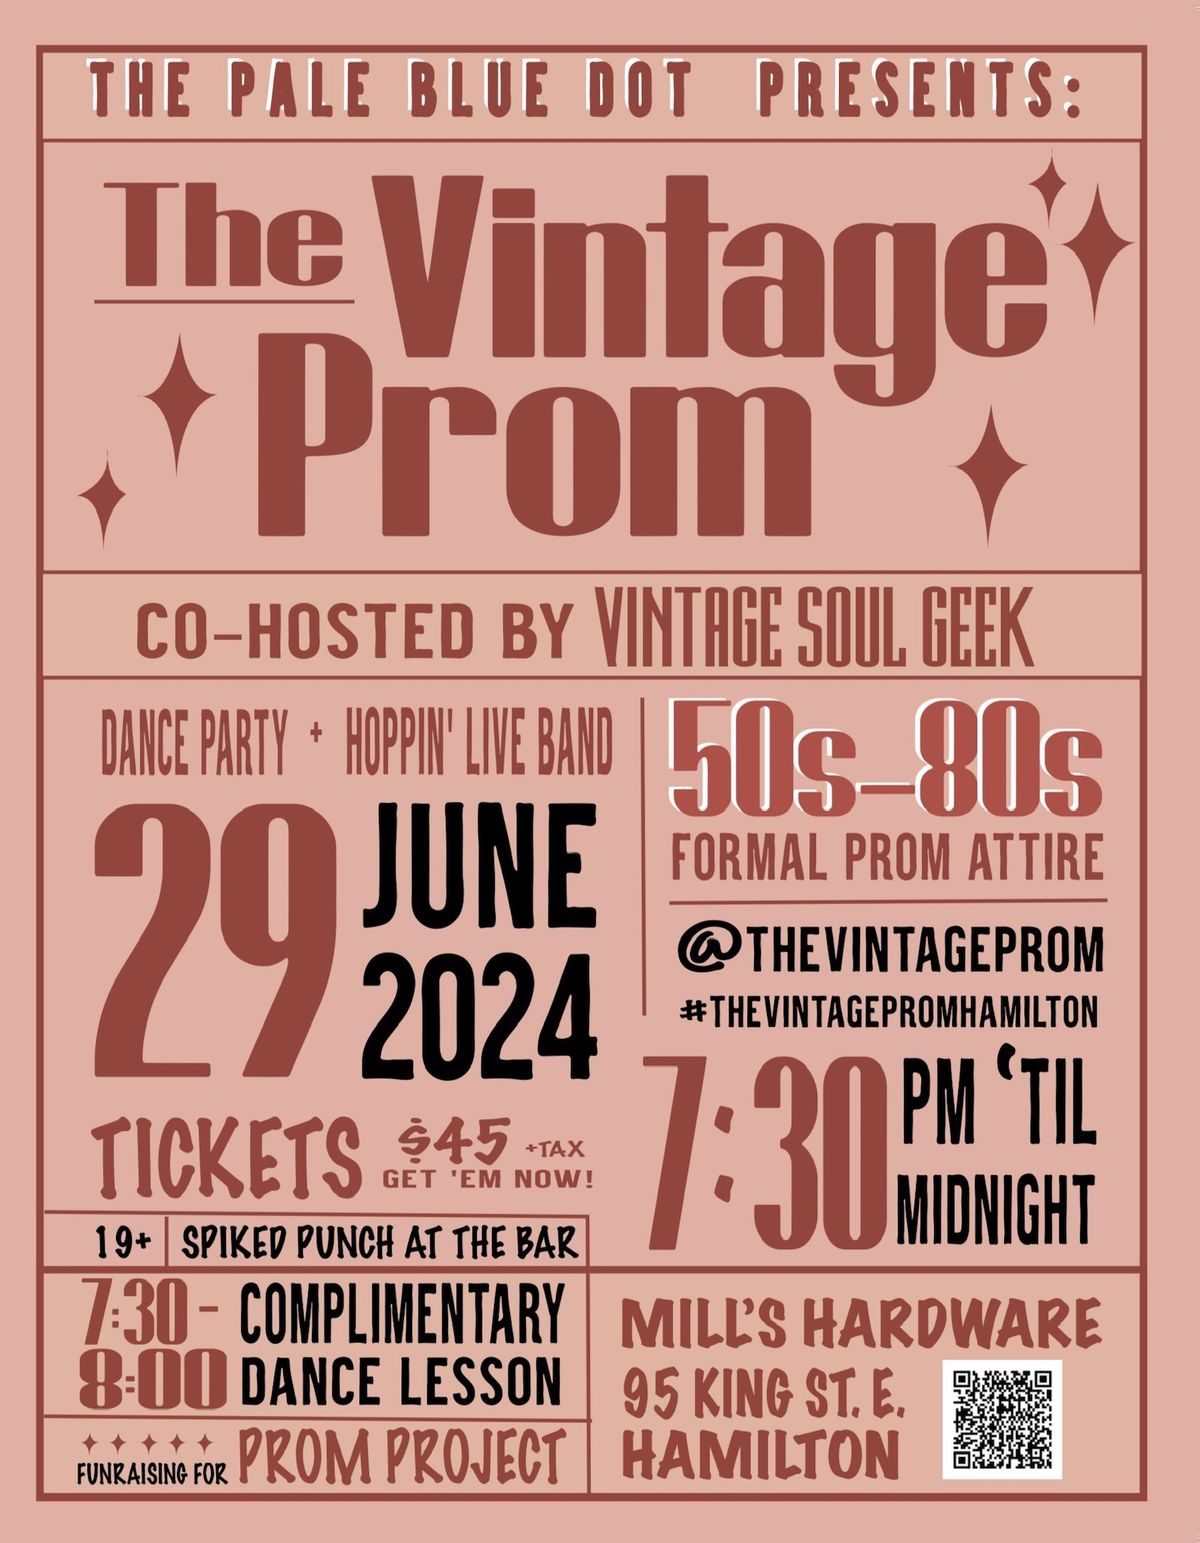 The Vintage Prom